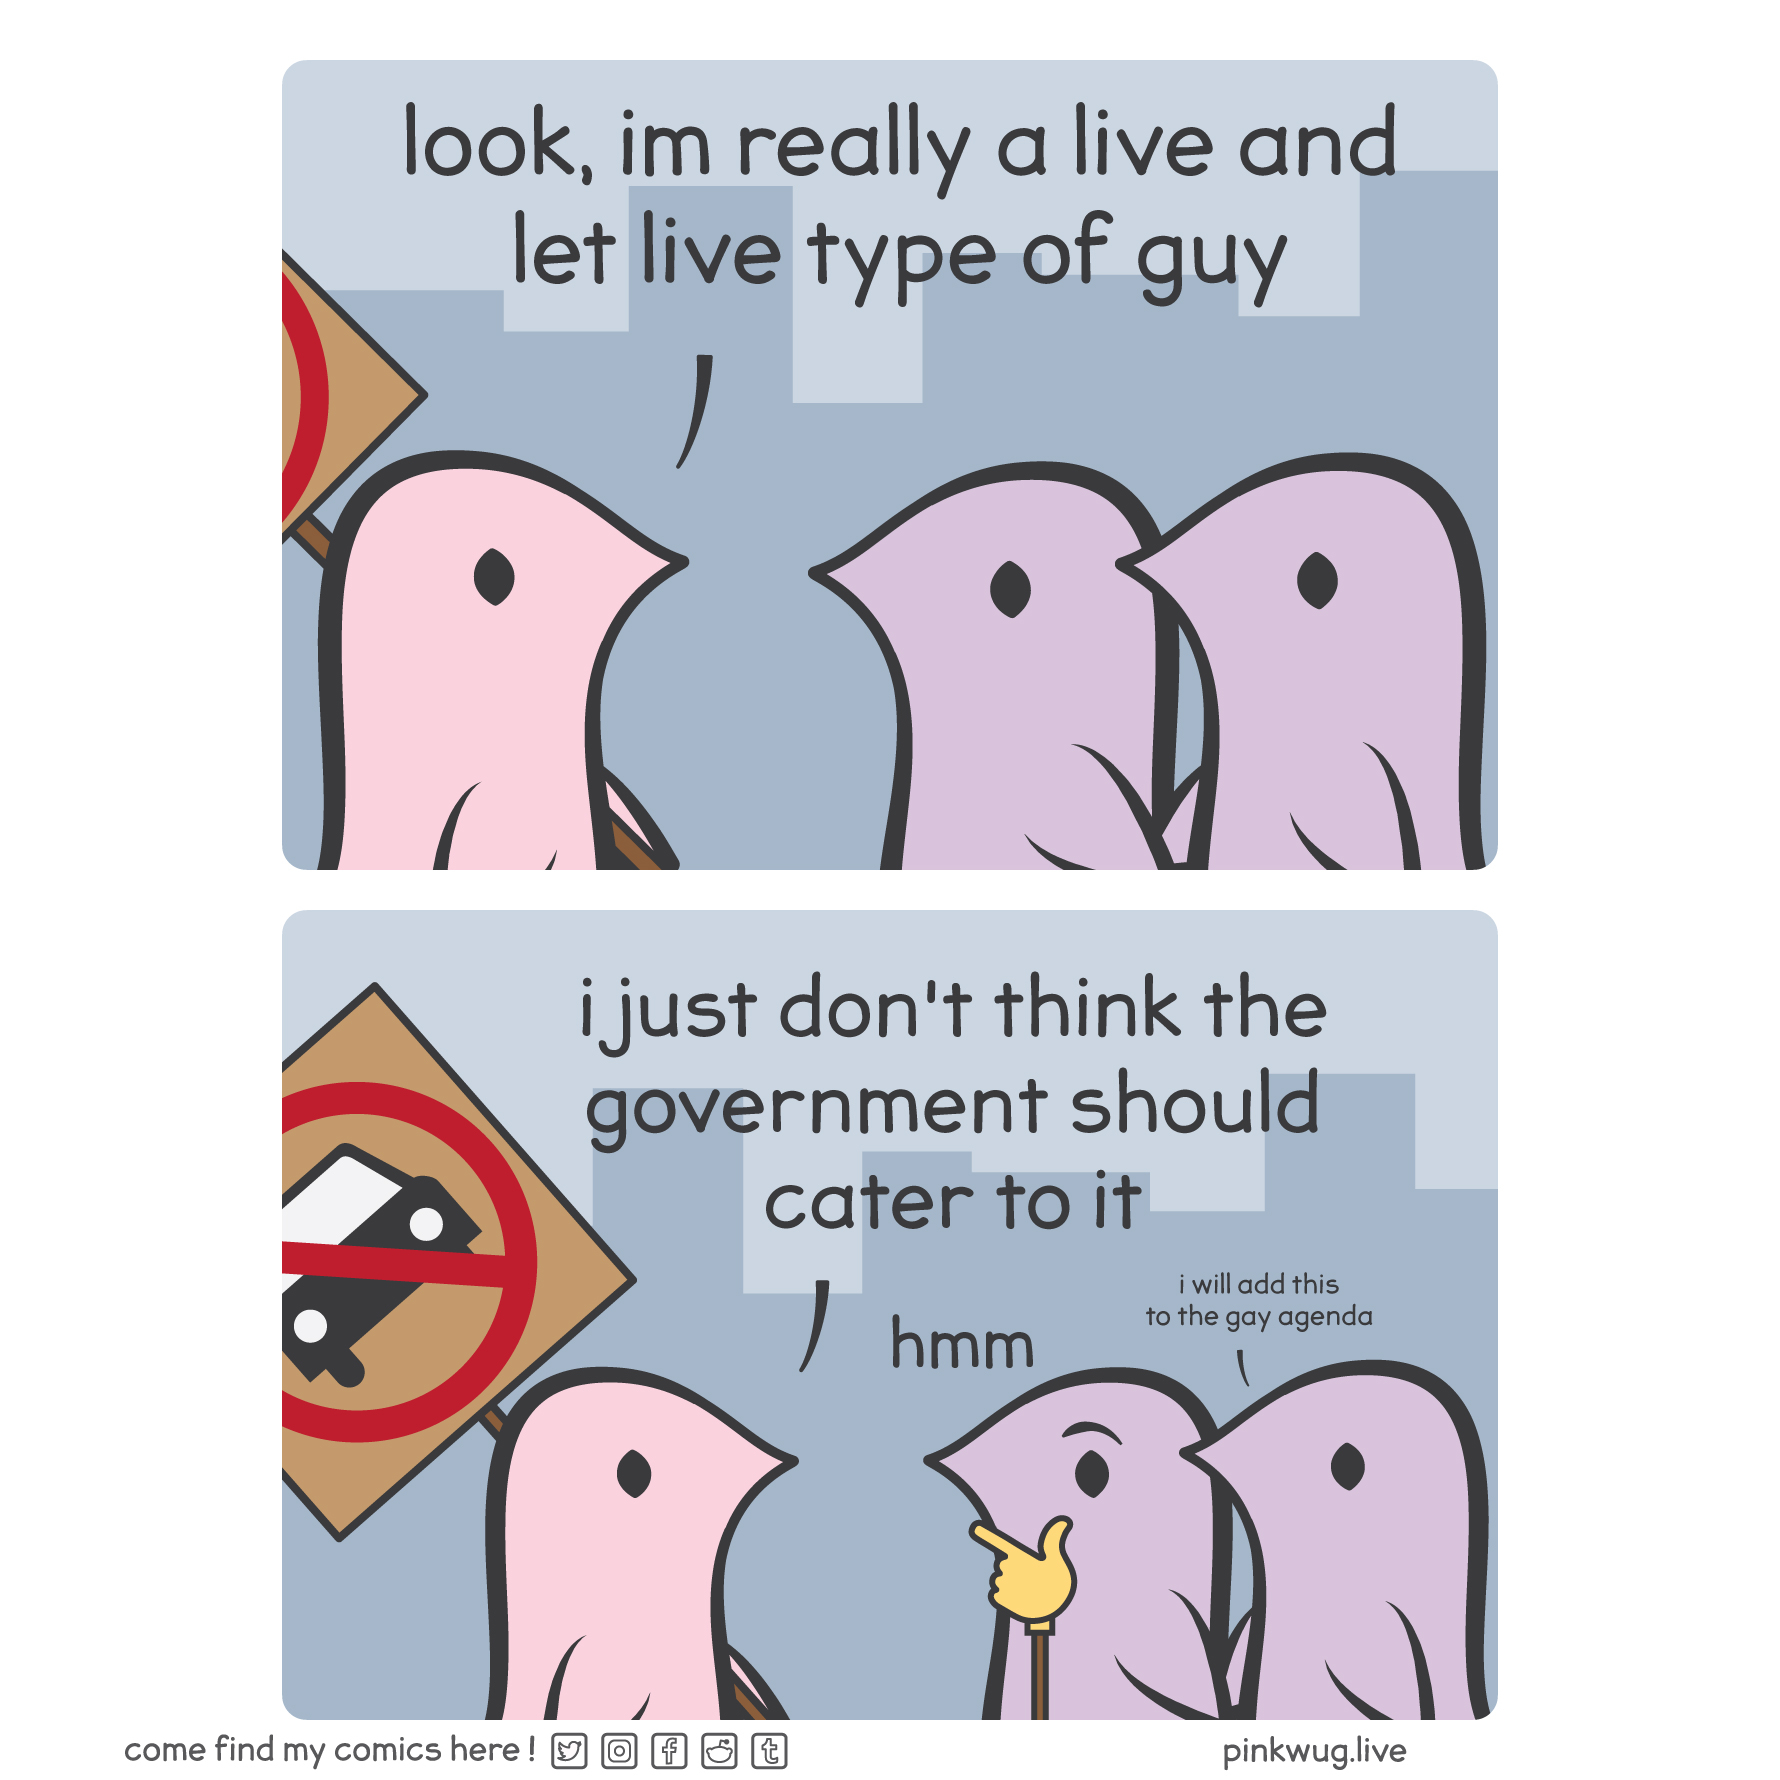 pinkwug comic: Panel 1: A pink wug holding a protest sign says to a pair of purple wugs holding hands: "look, I'm really a live and let live type of guy".

Panel 2: The sign is revealed to be a no car sign. The pink wug continues: "I just don't think the government should cater to it". The first purple wug has the thinking emoji face and says "hmm". The second purple wug says quietly: "I will add this to the gay agenda".